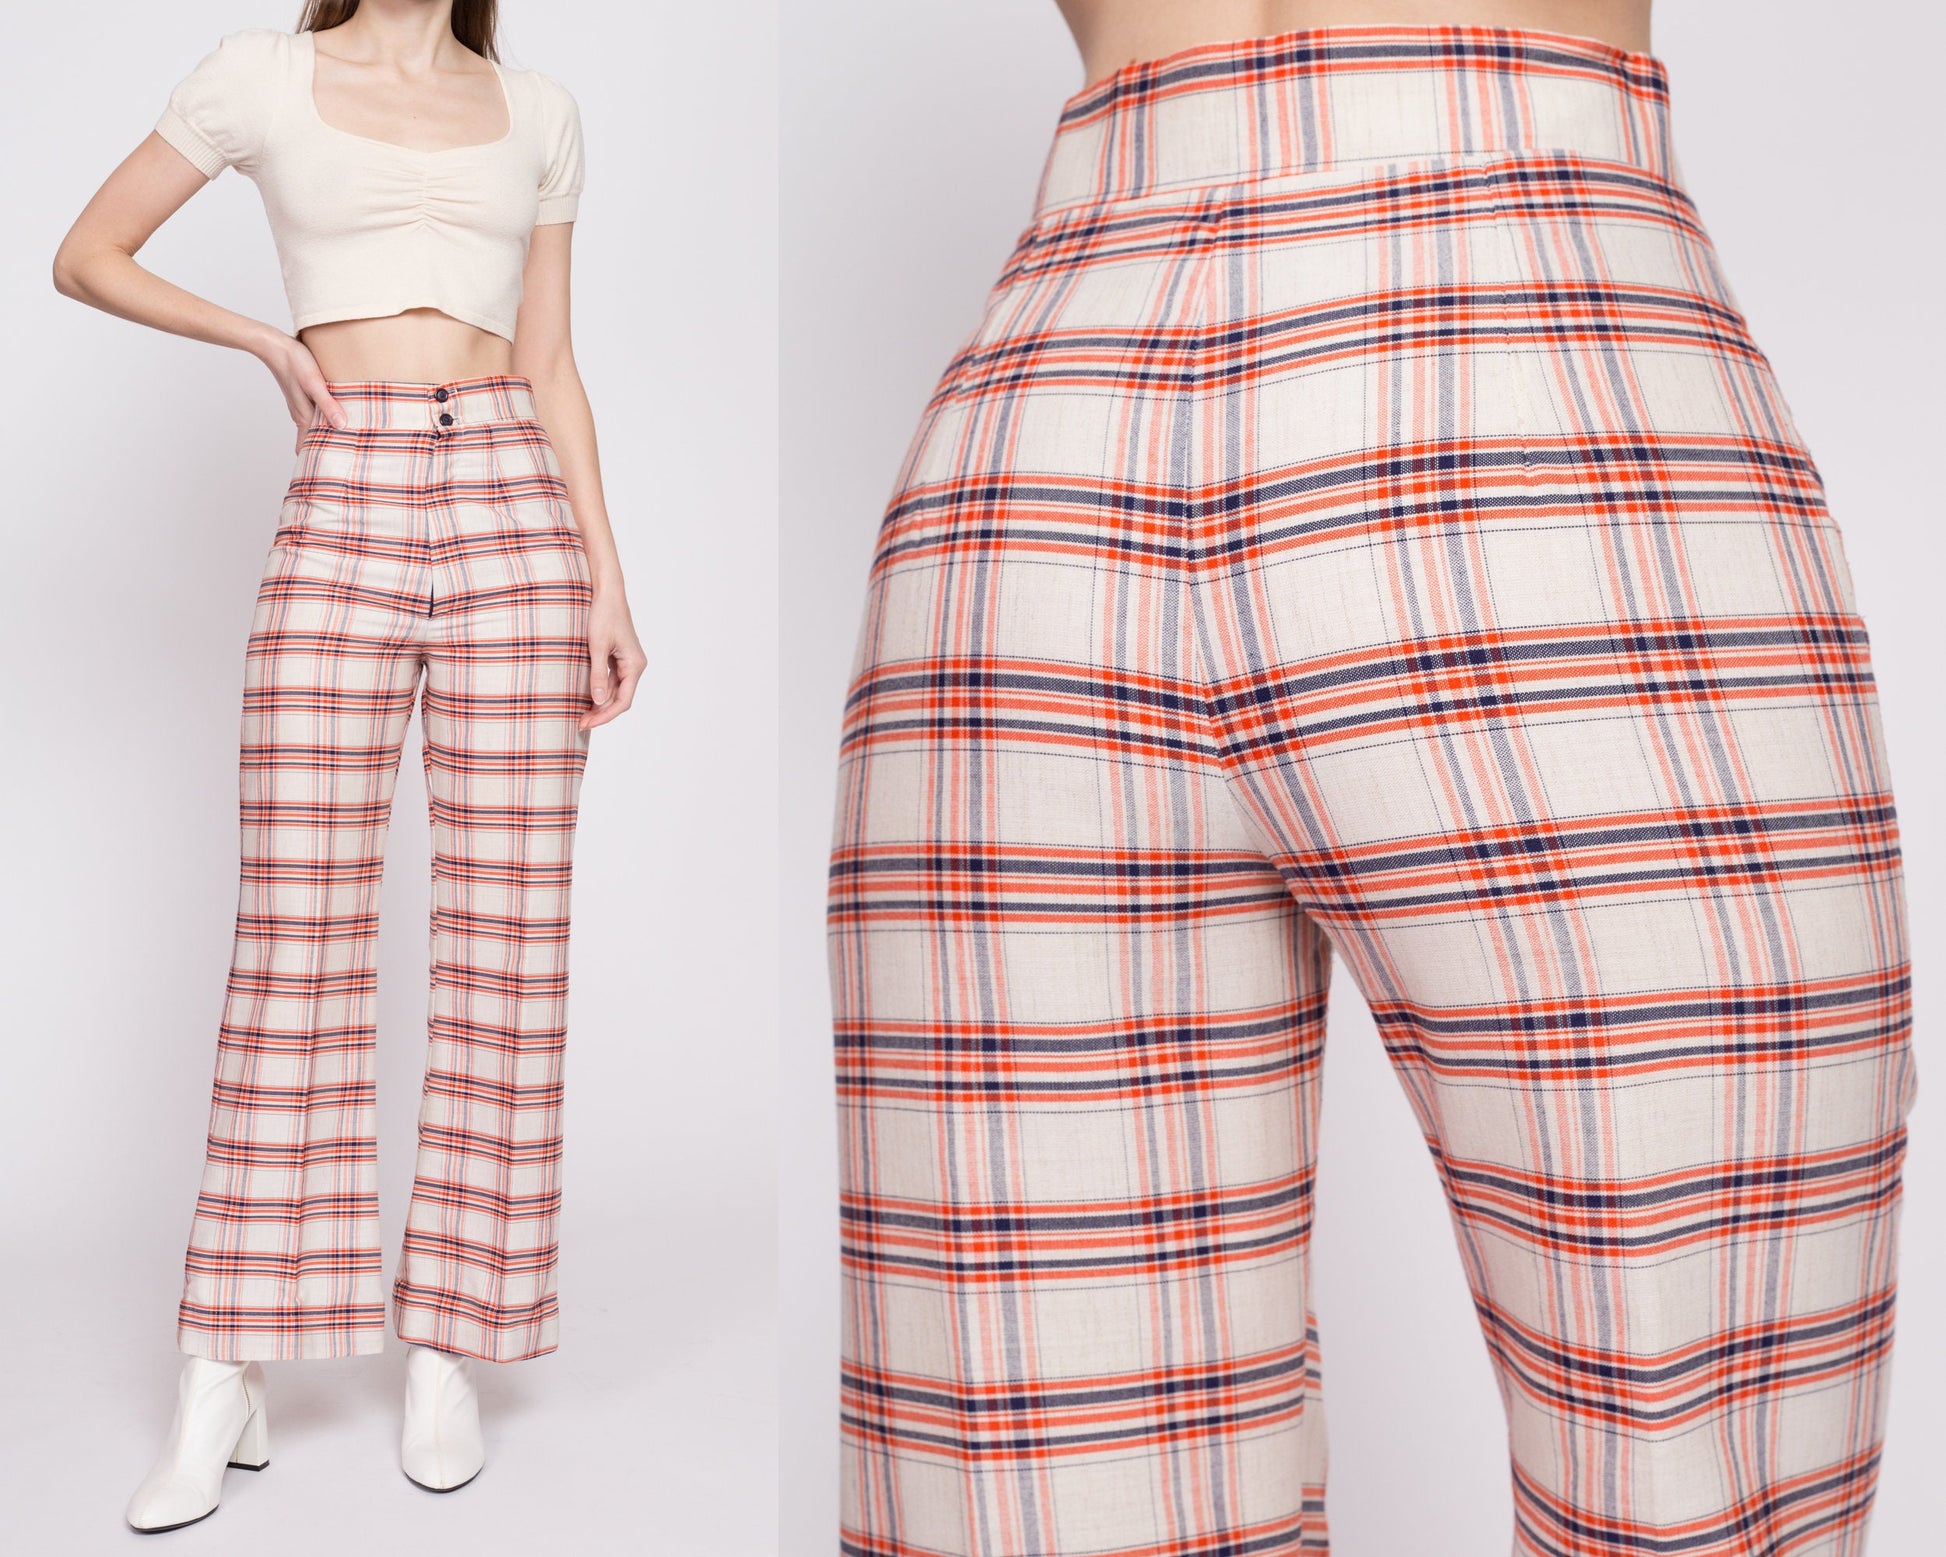 70s Orange & White Plaid High Waisted Pants - Small, 26.5" | Vintage Flared Retro Trousers